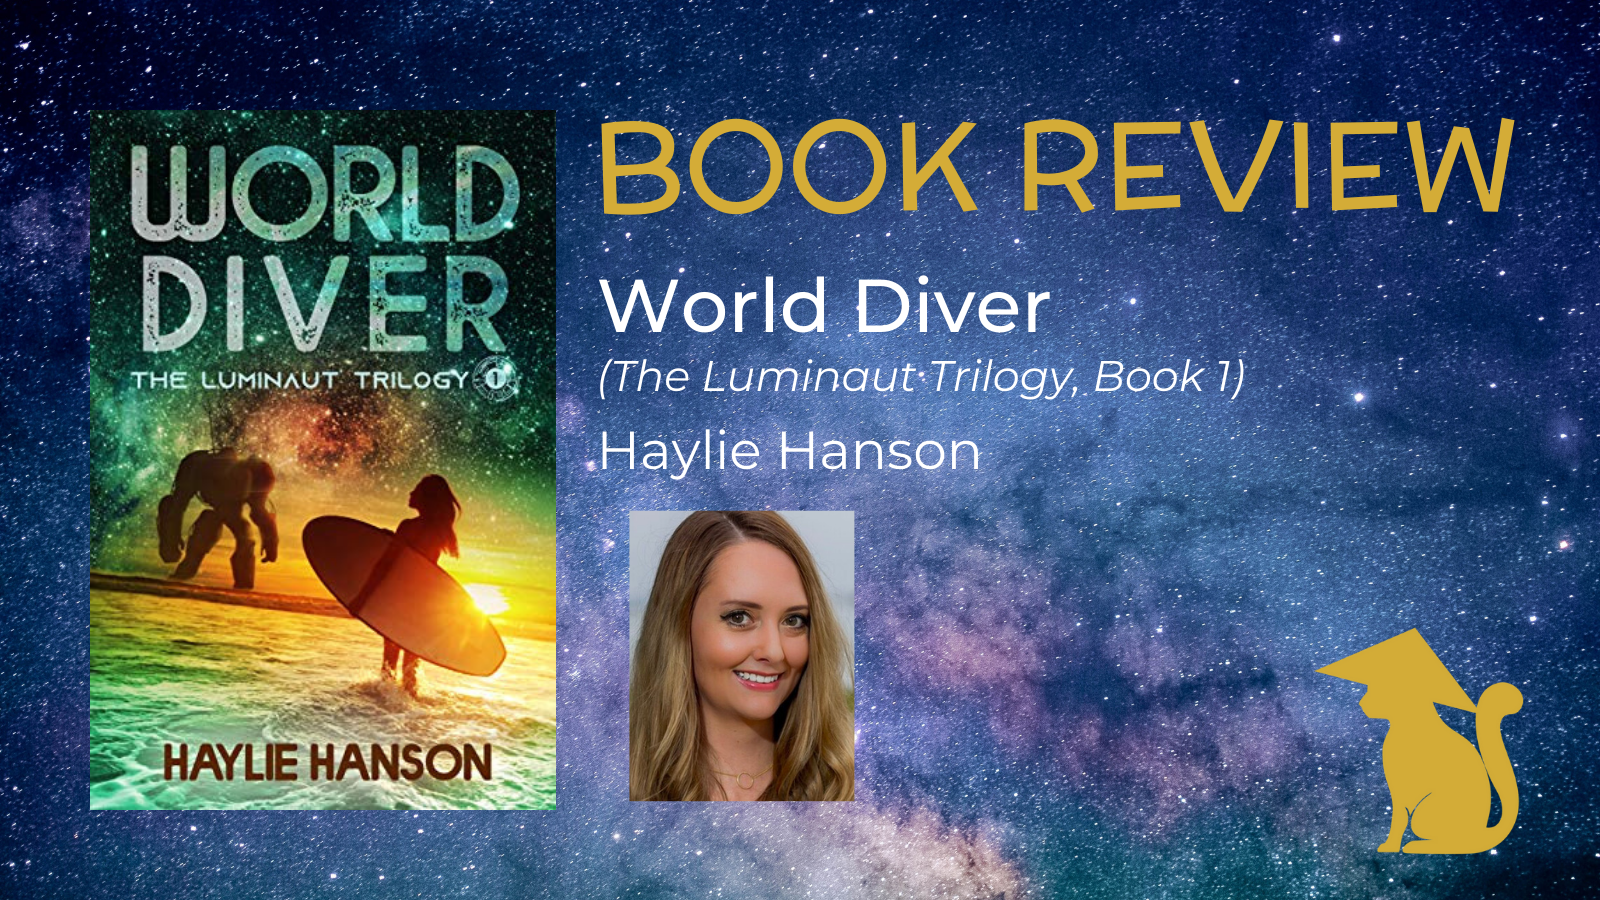 You are currently viewing World Diver by Haylie Hanson